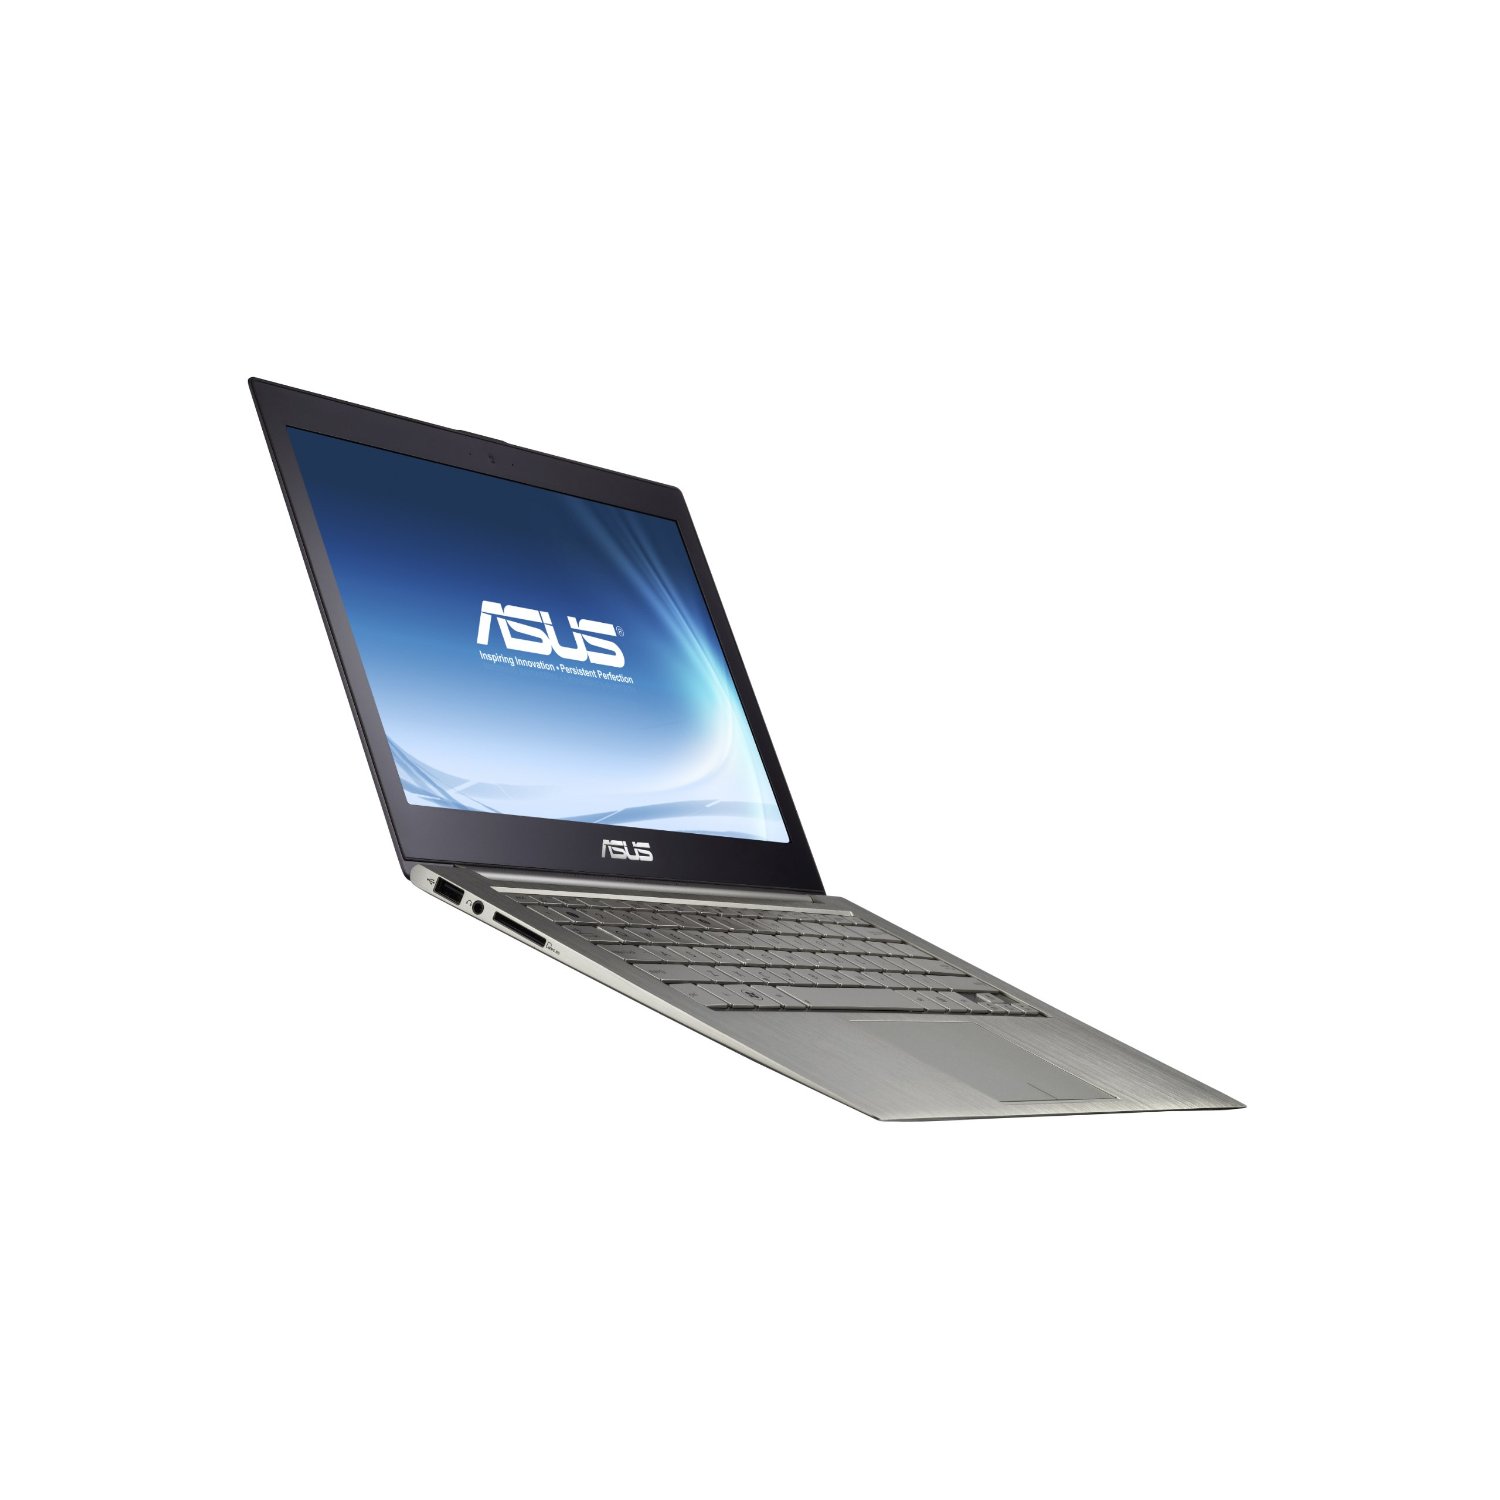 http://thetechjournal.com/wp-content/uploads/images/1111/1322100736-asus-zenbook-ux31edh72-133inch-thin-and-light-ultrabook-6.jpg